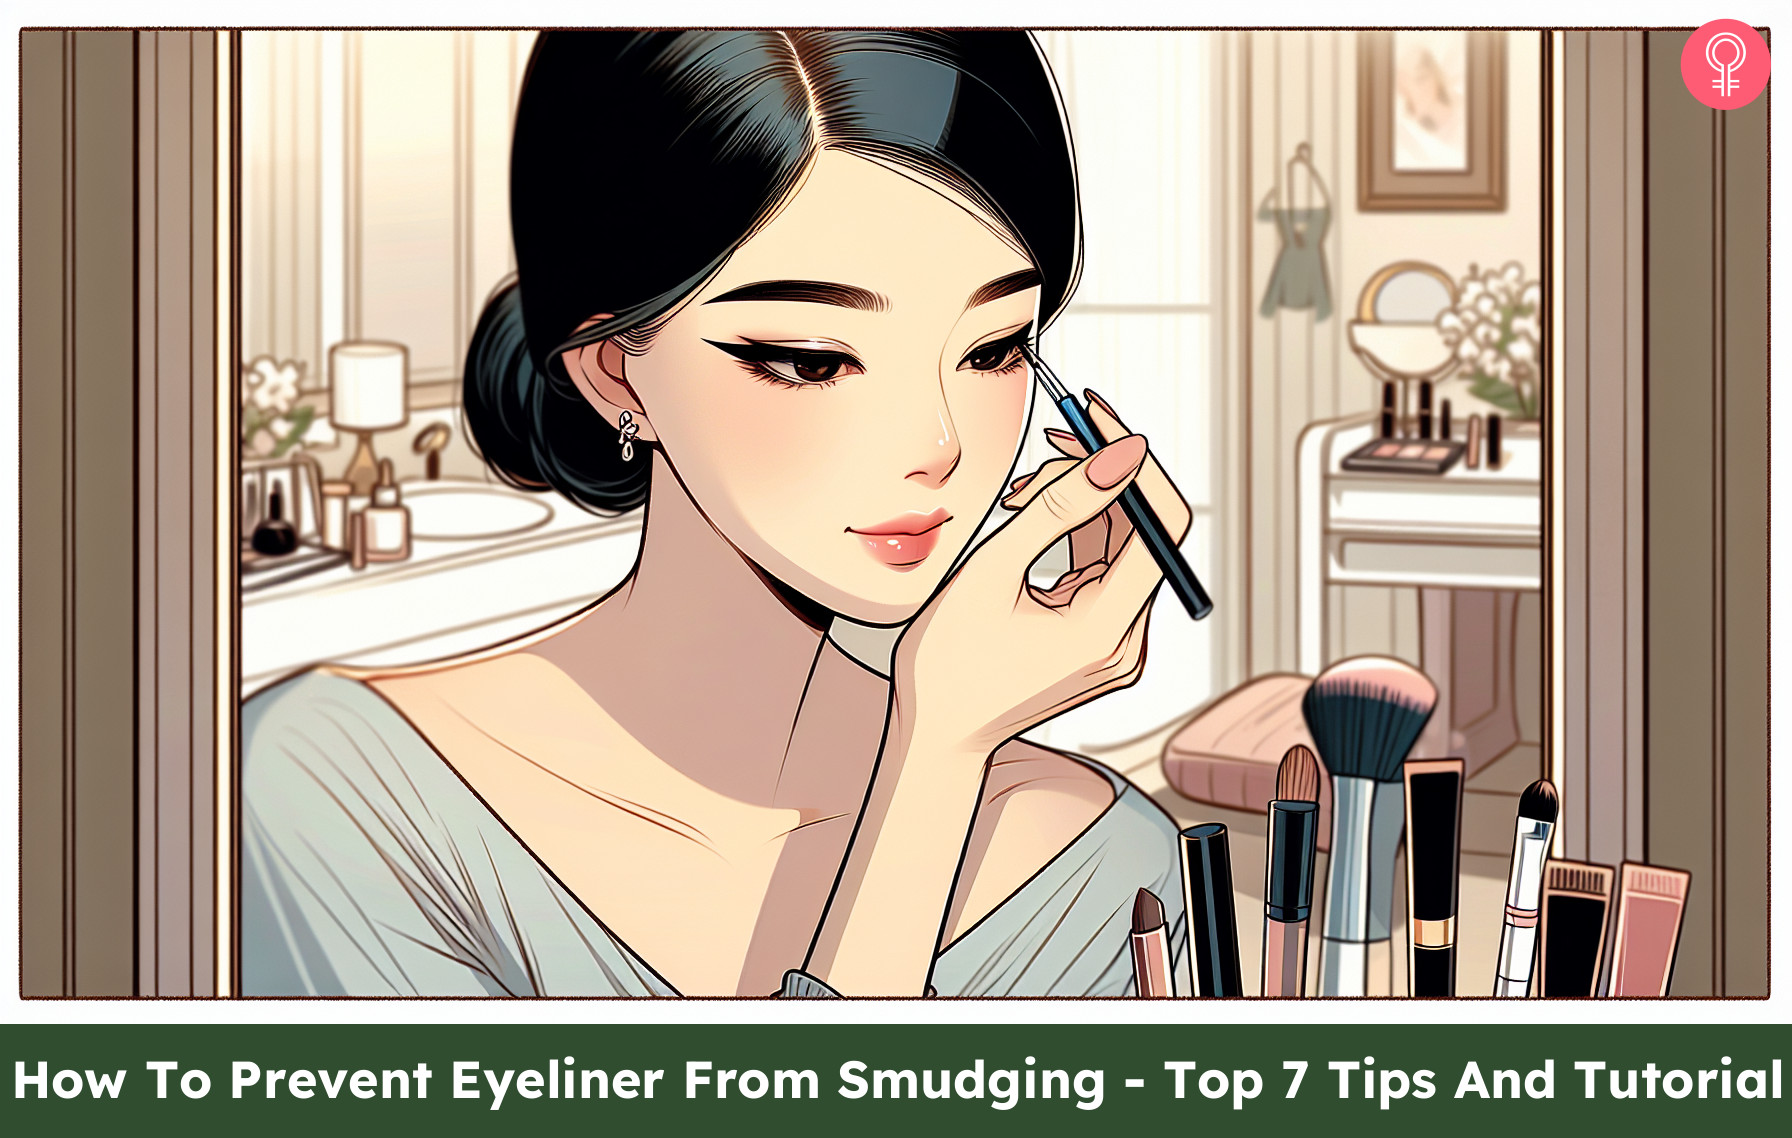 How to prevent Eyeliner from smudging